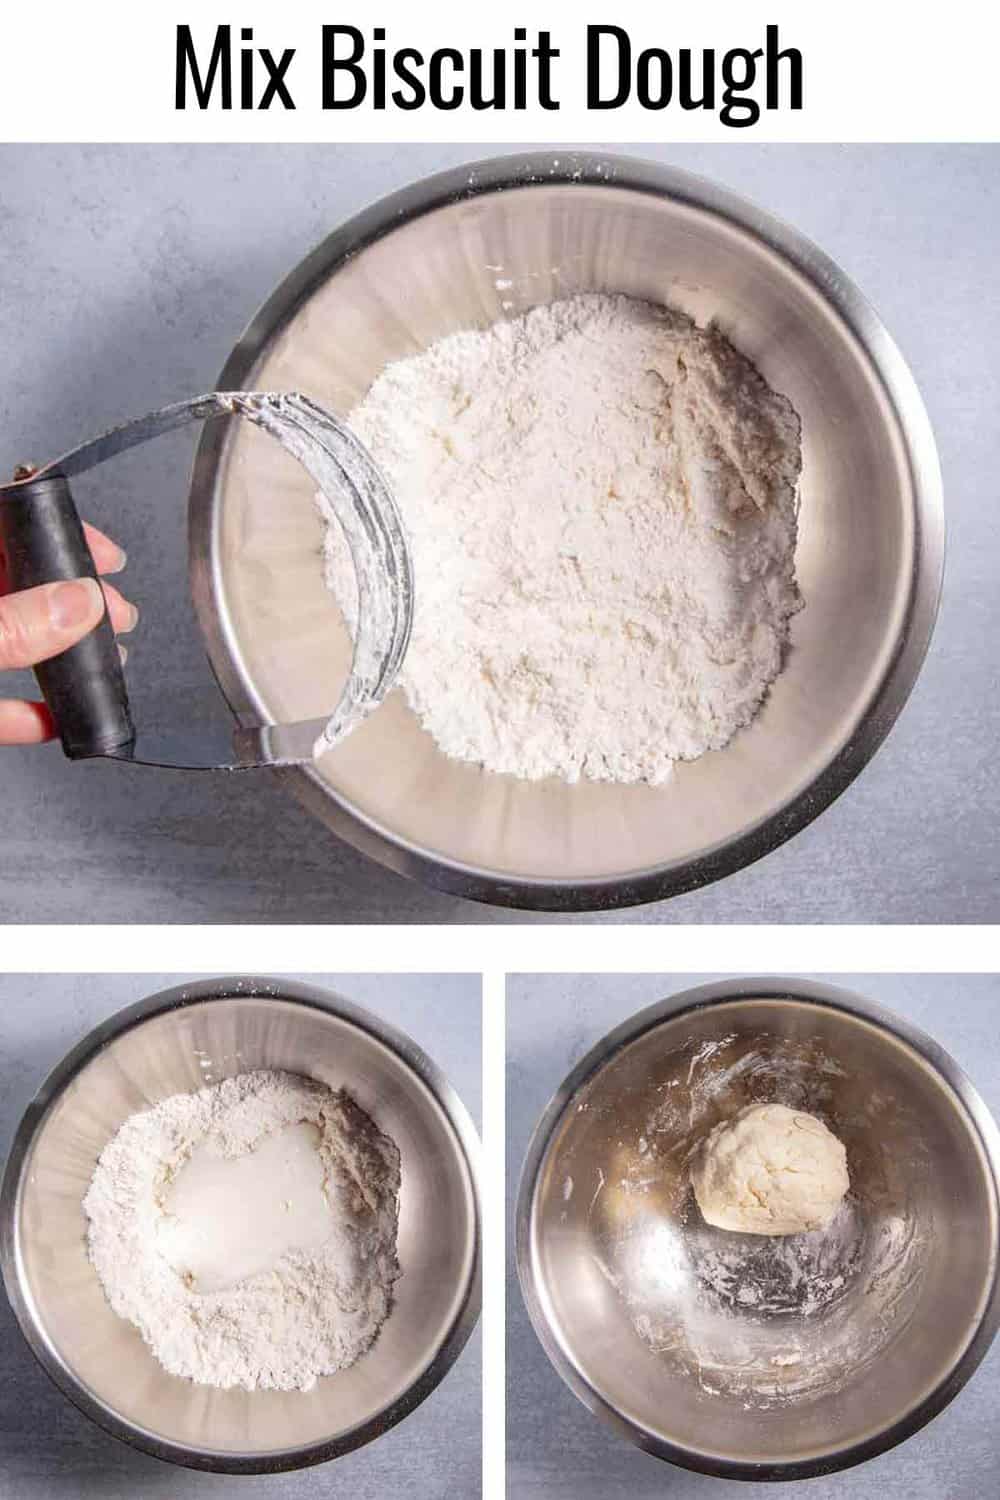 step by step photos showing mixing the biscuit dough